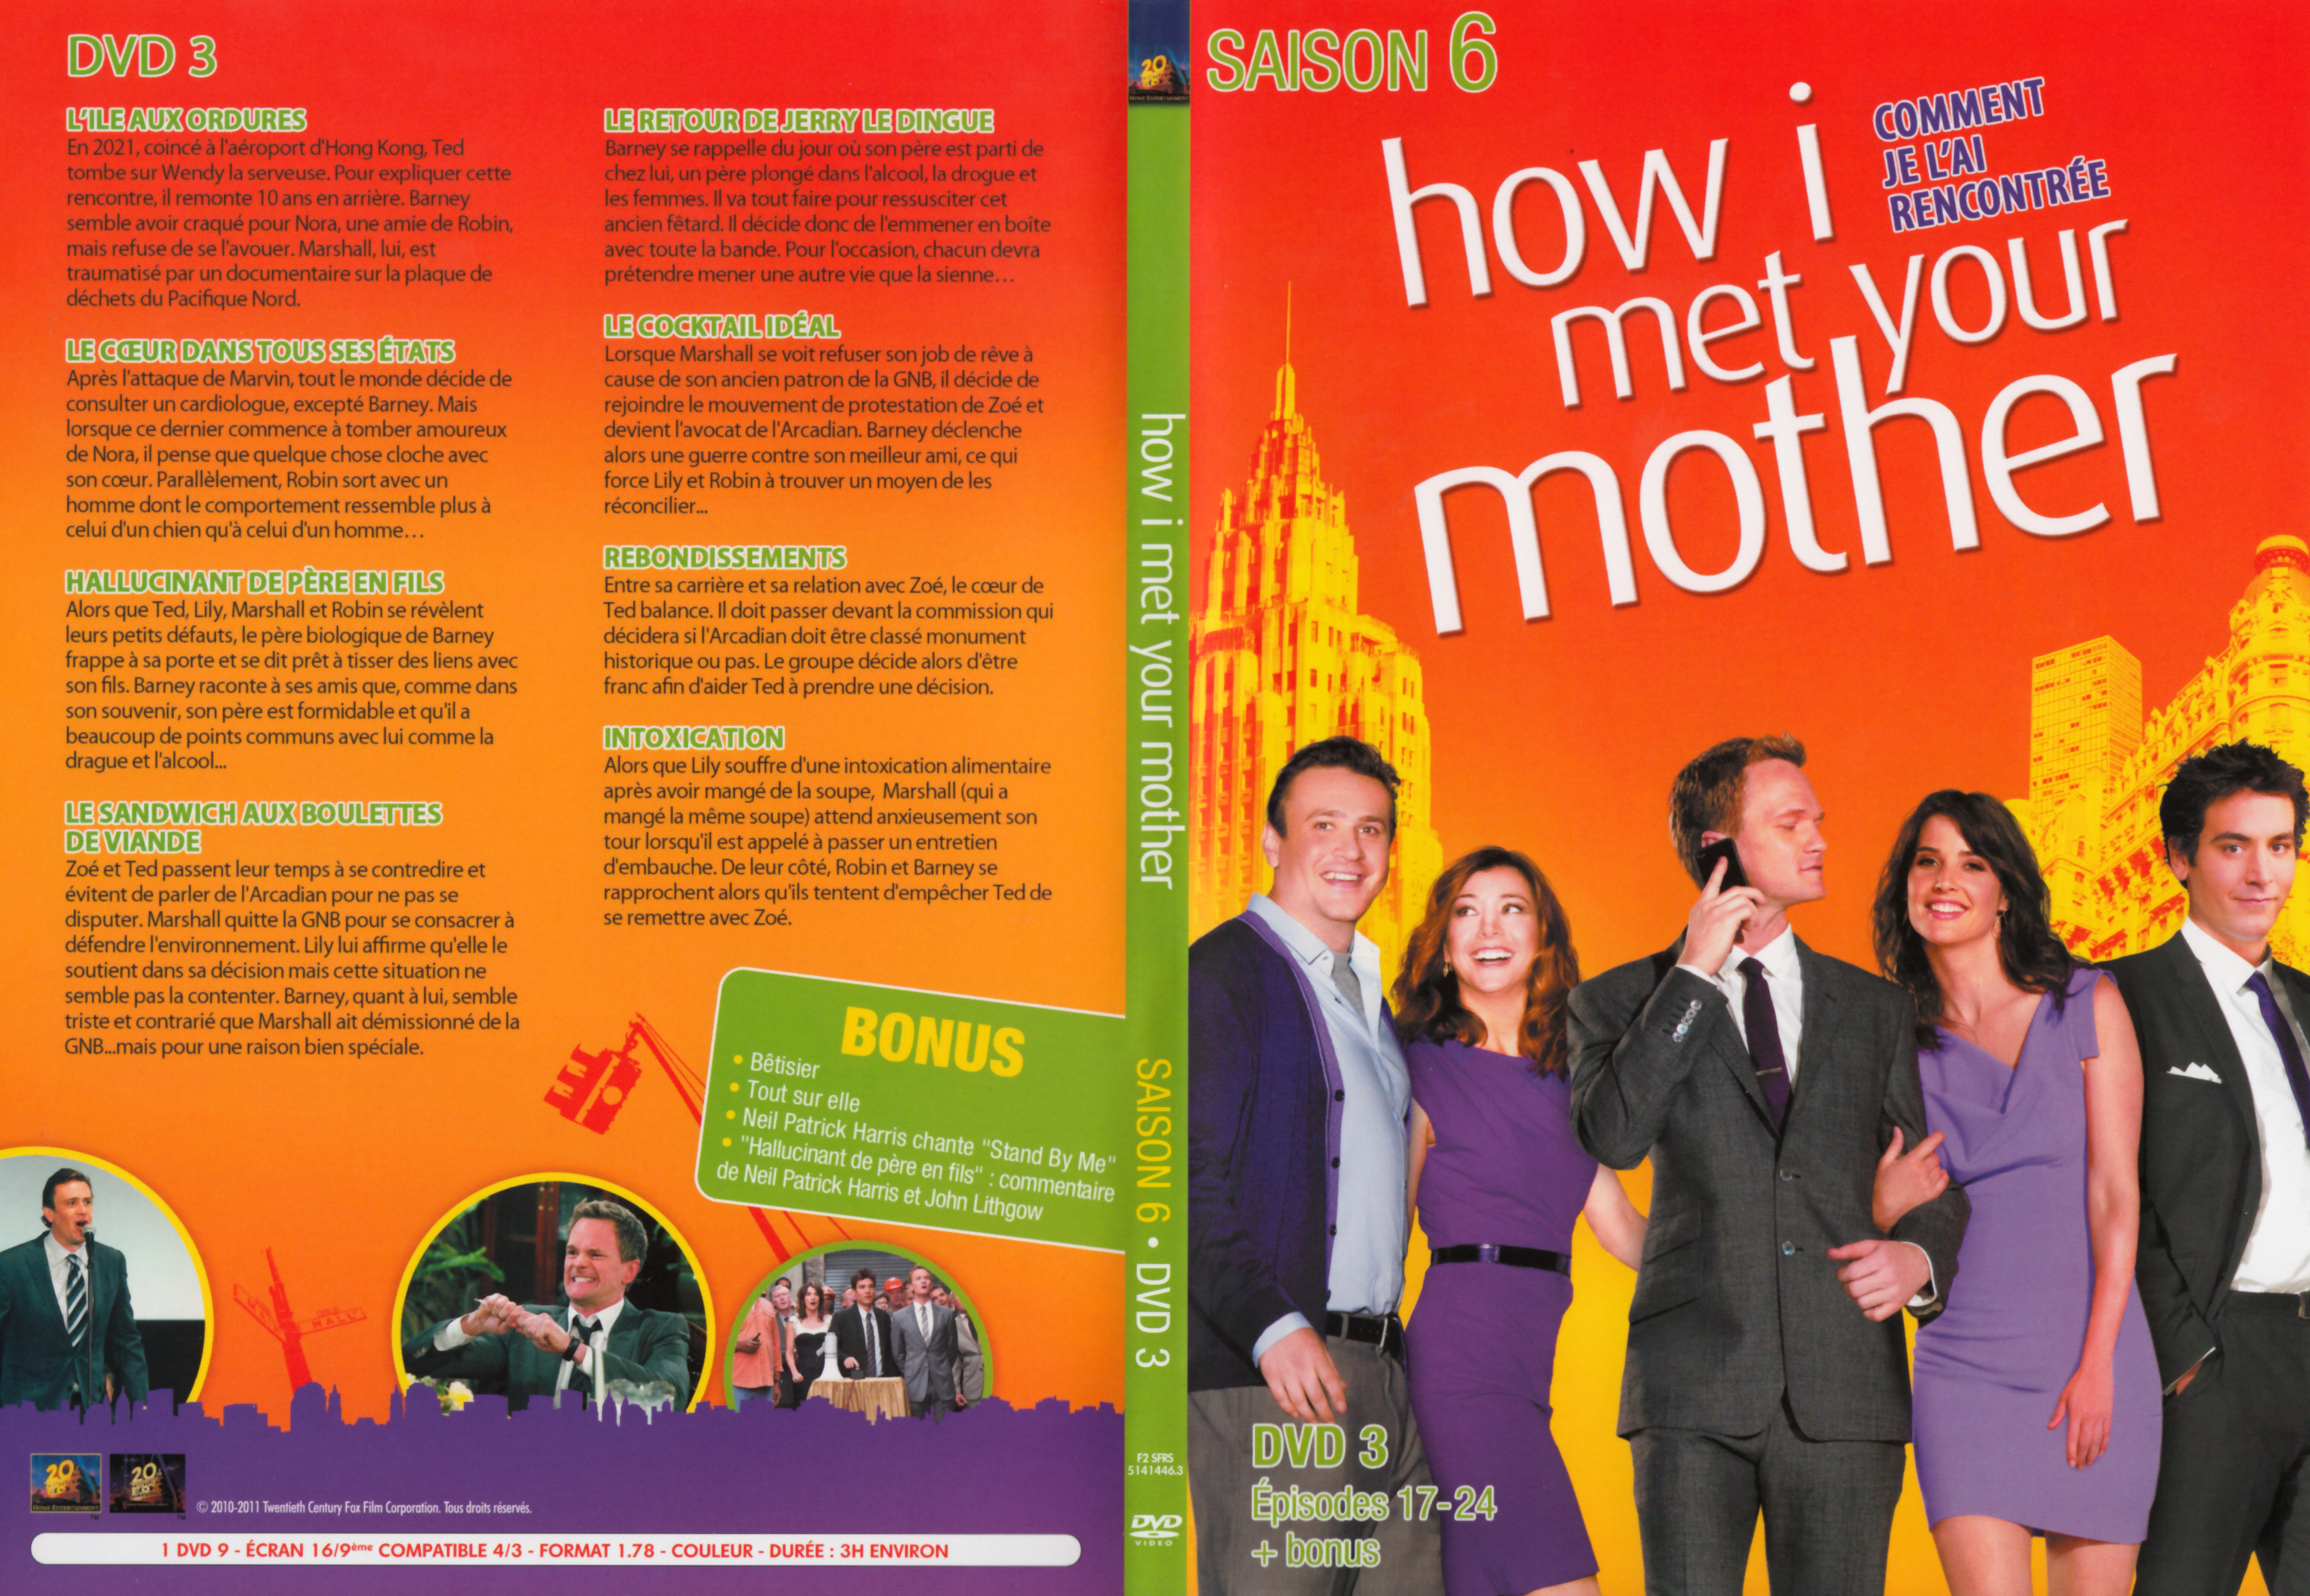 Jaquette DVD How i met your mother Saison 6 DVD 3